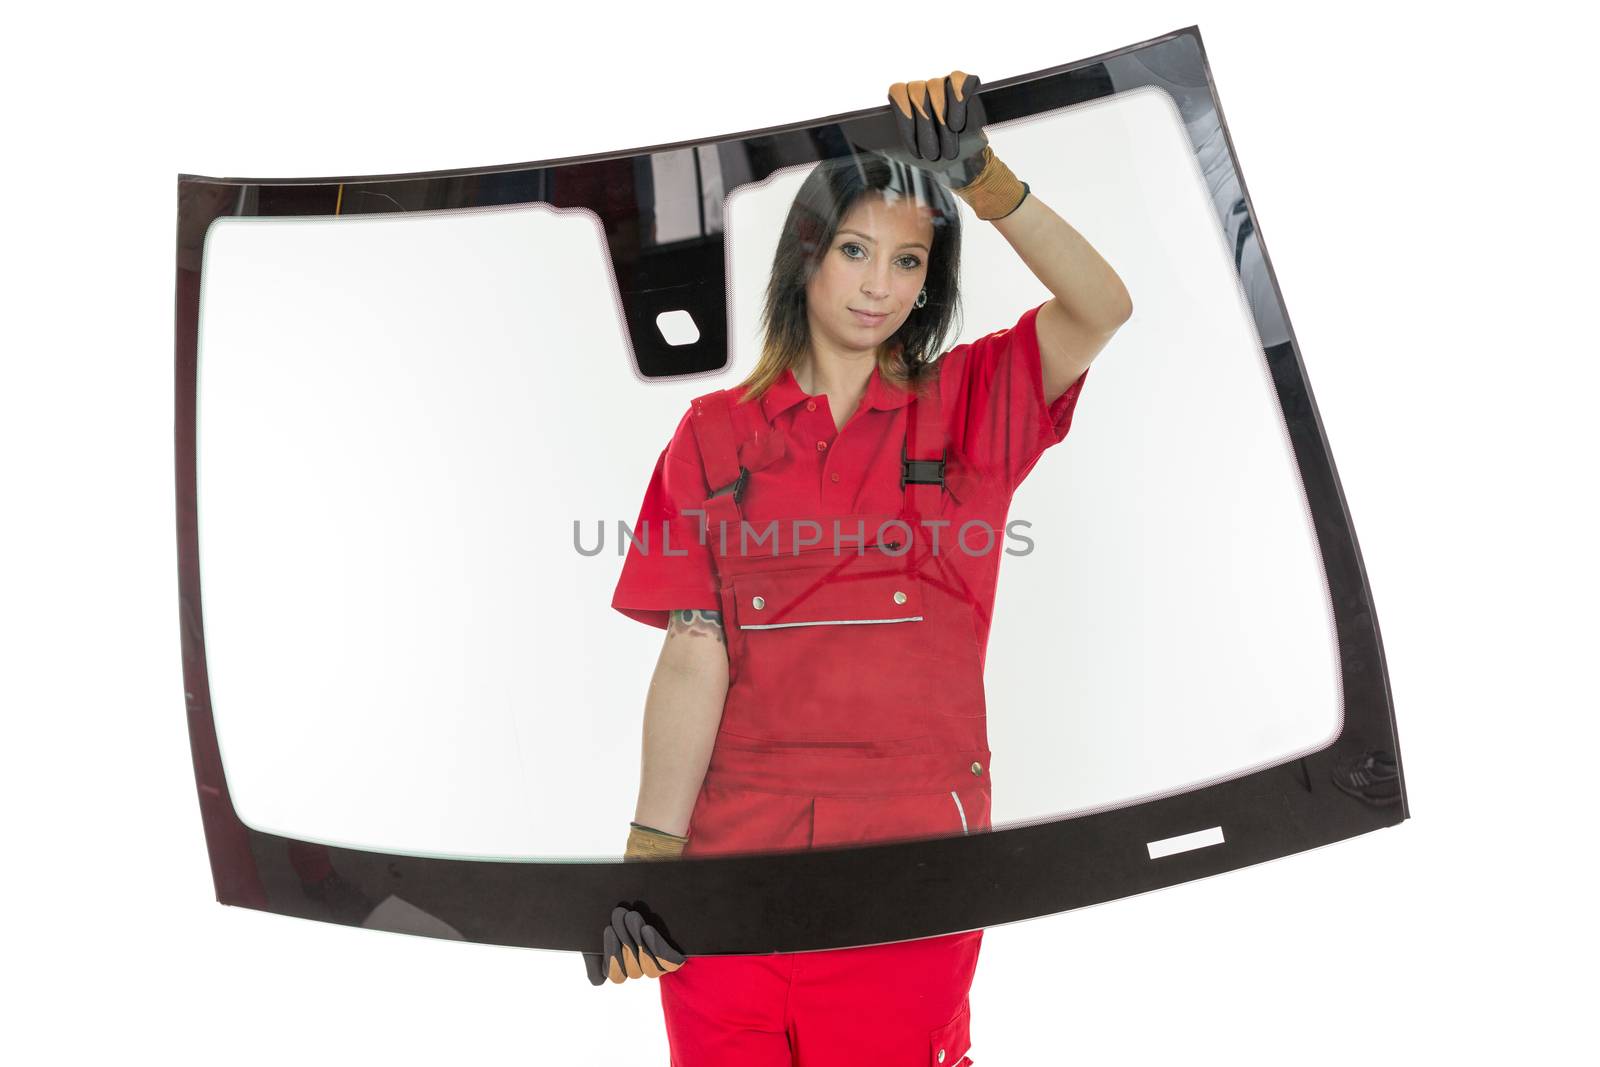 Worker glazier's workshop with car windscreen or windshield isolated in front of white background